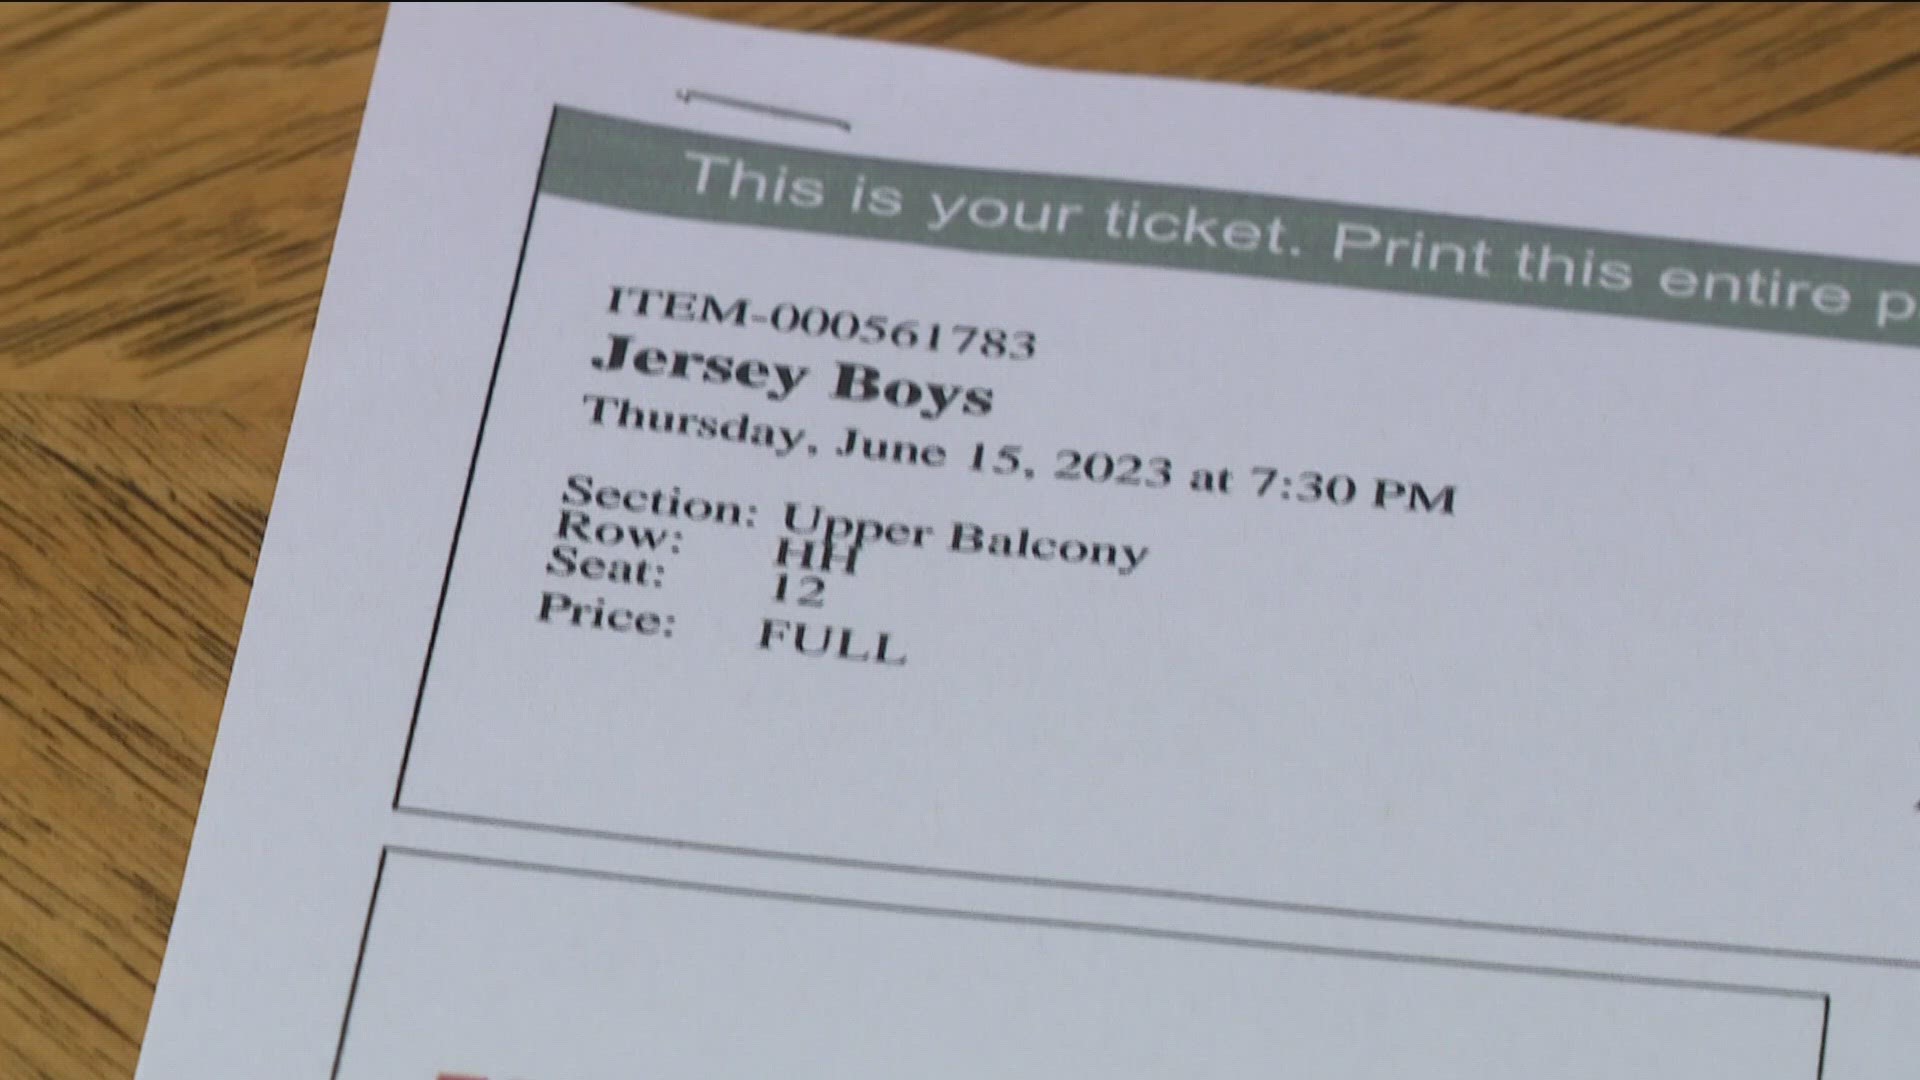 A Temperance woman was tricked into spending over $400 for two tickets to 'Jersey Boys' at the Croswell.